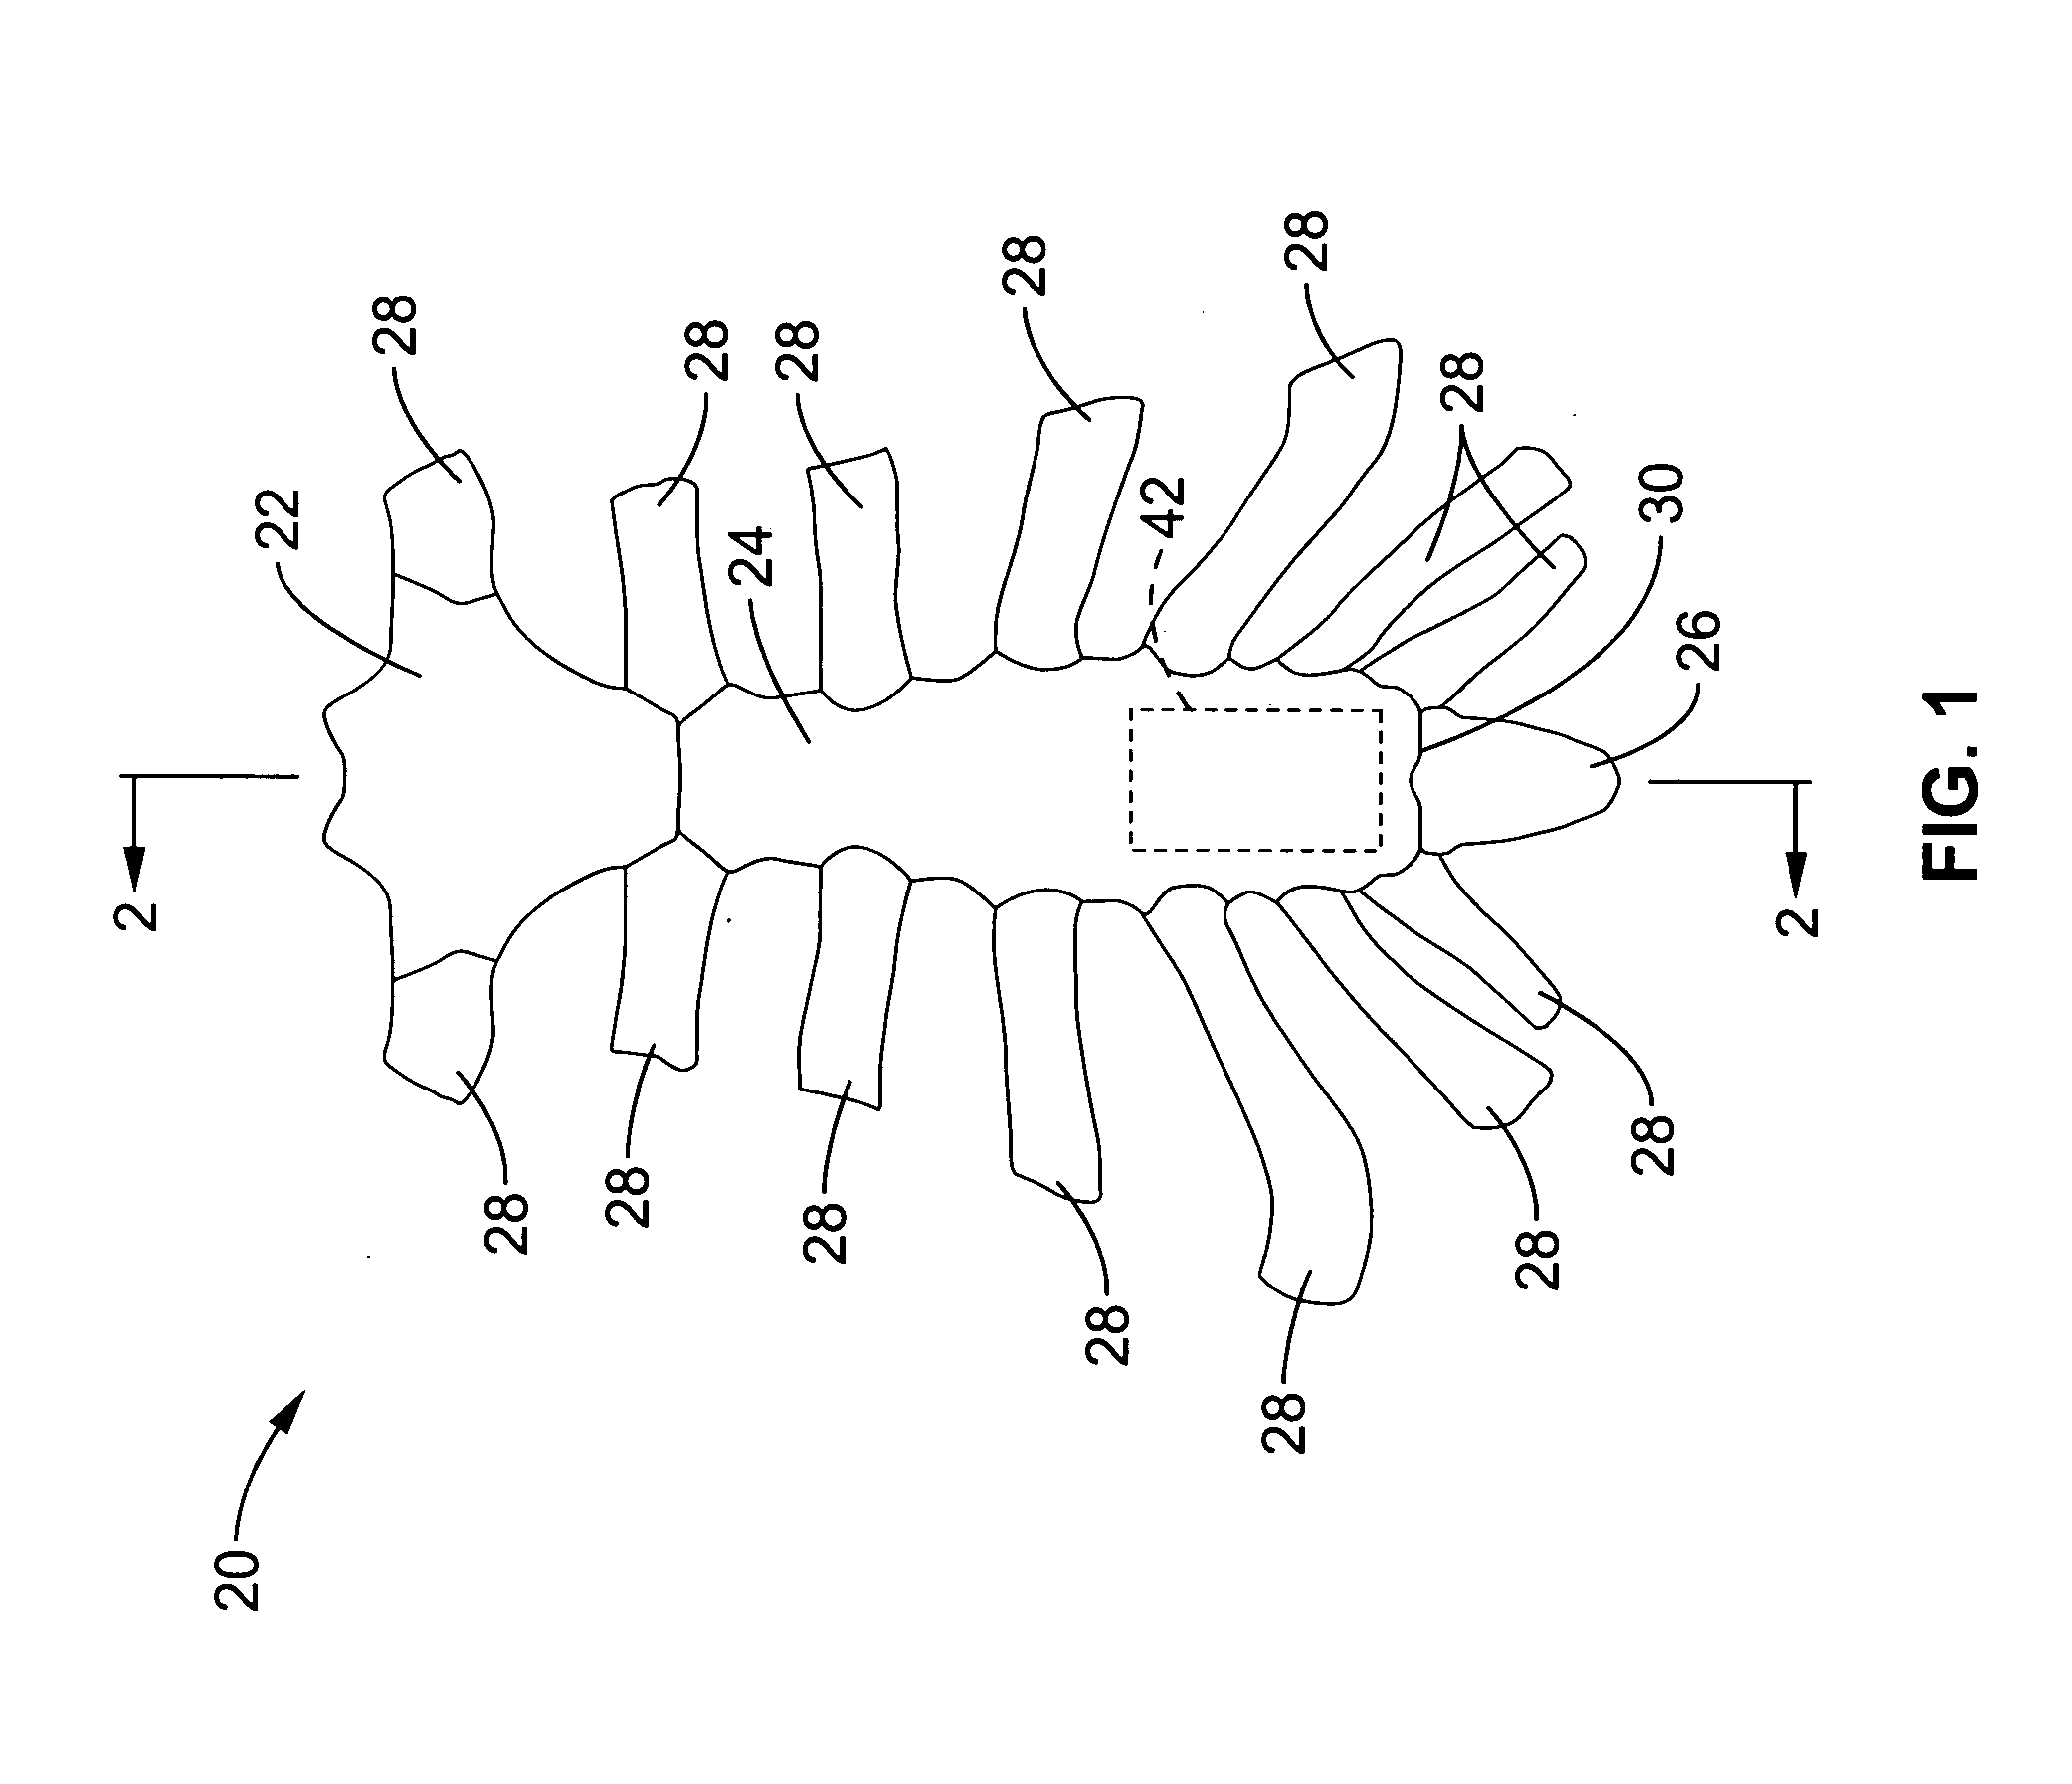 Apparatus and methods for magnetic alteration of deformities